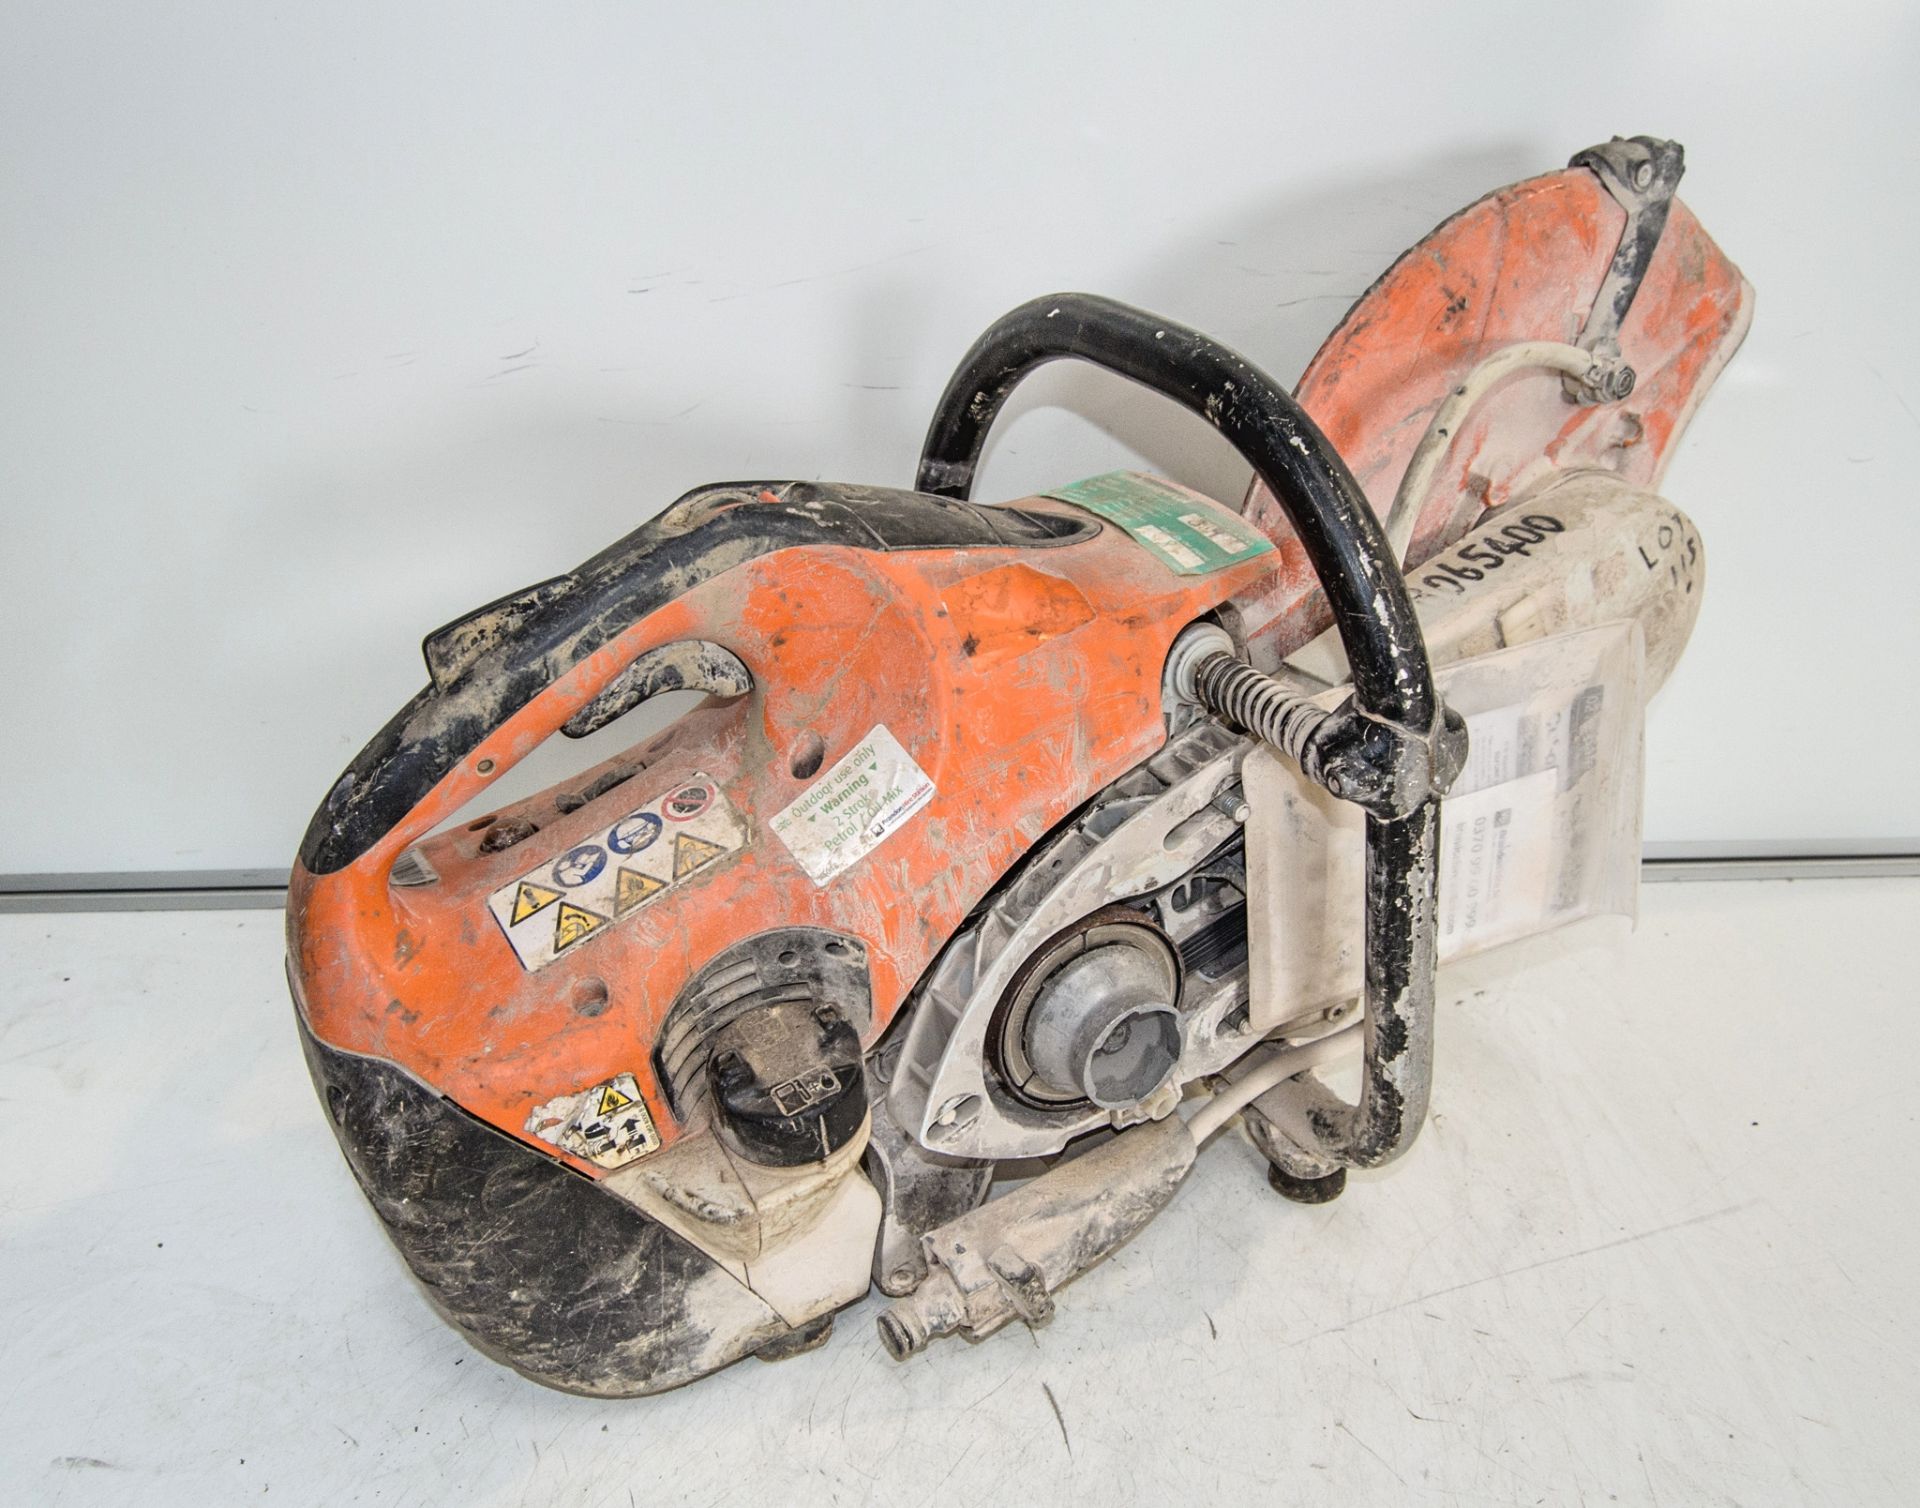 Stihl TS410 petrol driven cut off saw ** Pull cord assembly missing ** 18065400 - Image 2 of 2